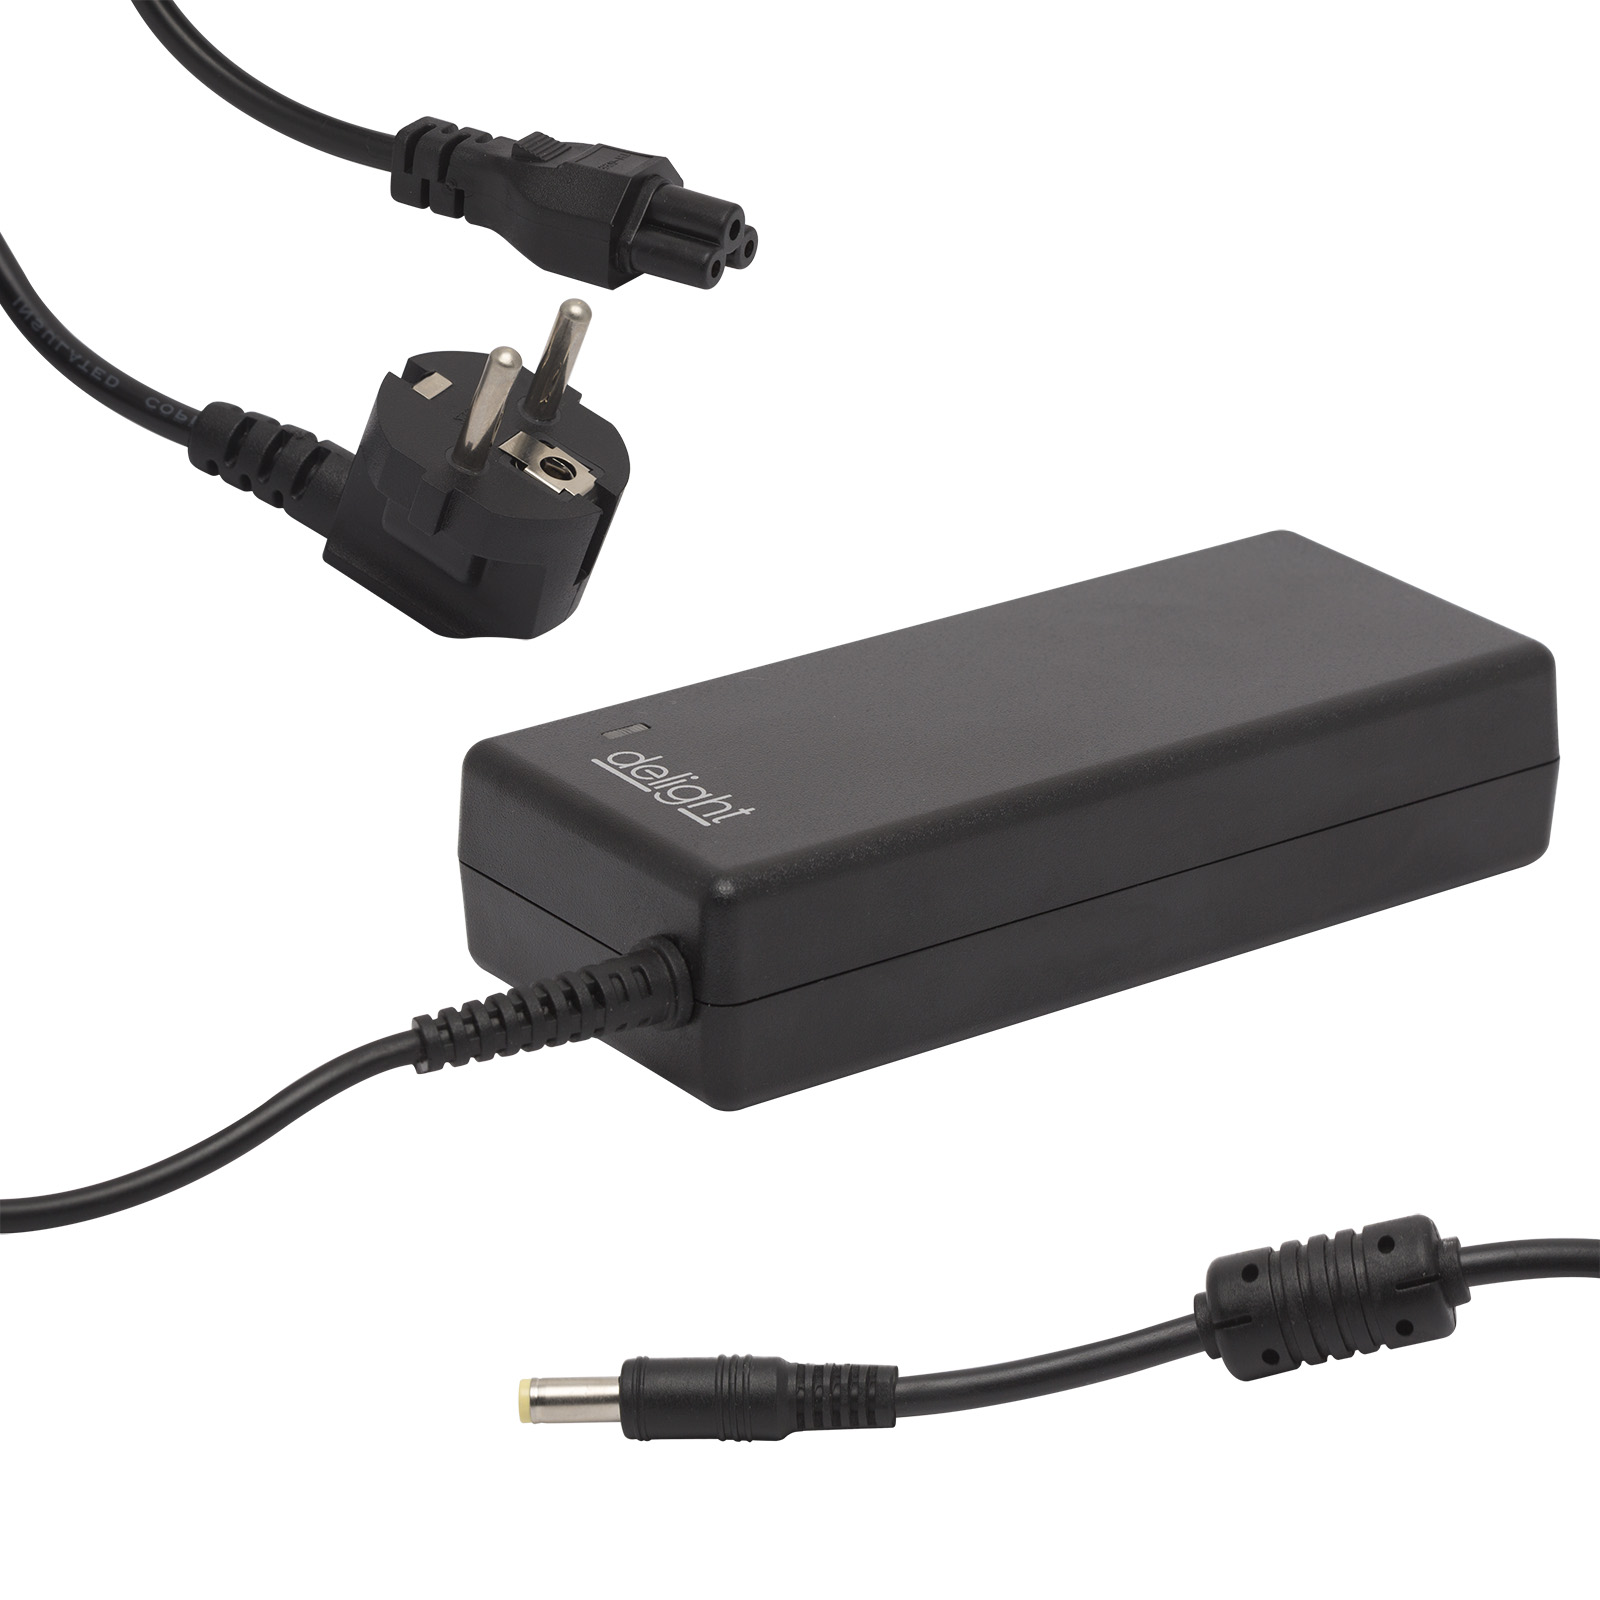 Universal laptop/notebook adapter with cable thumb